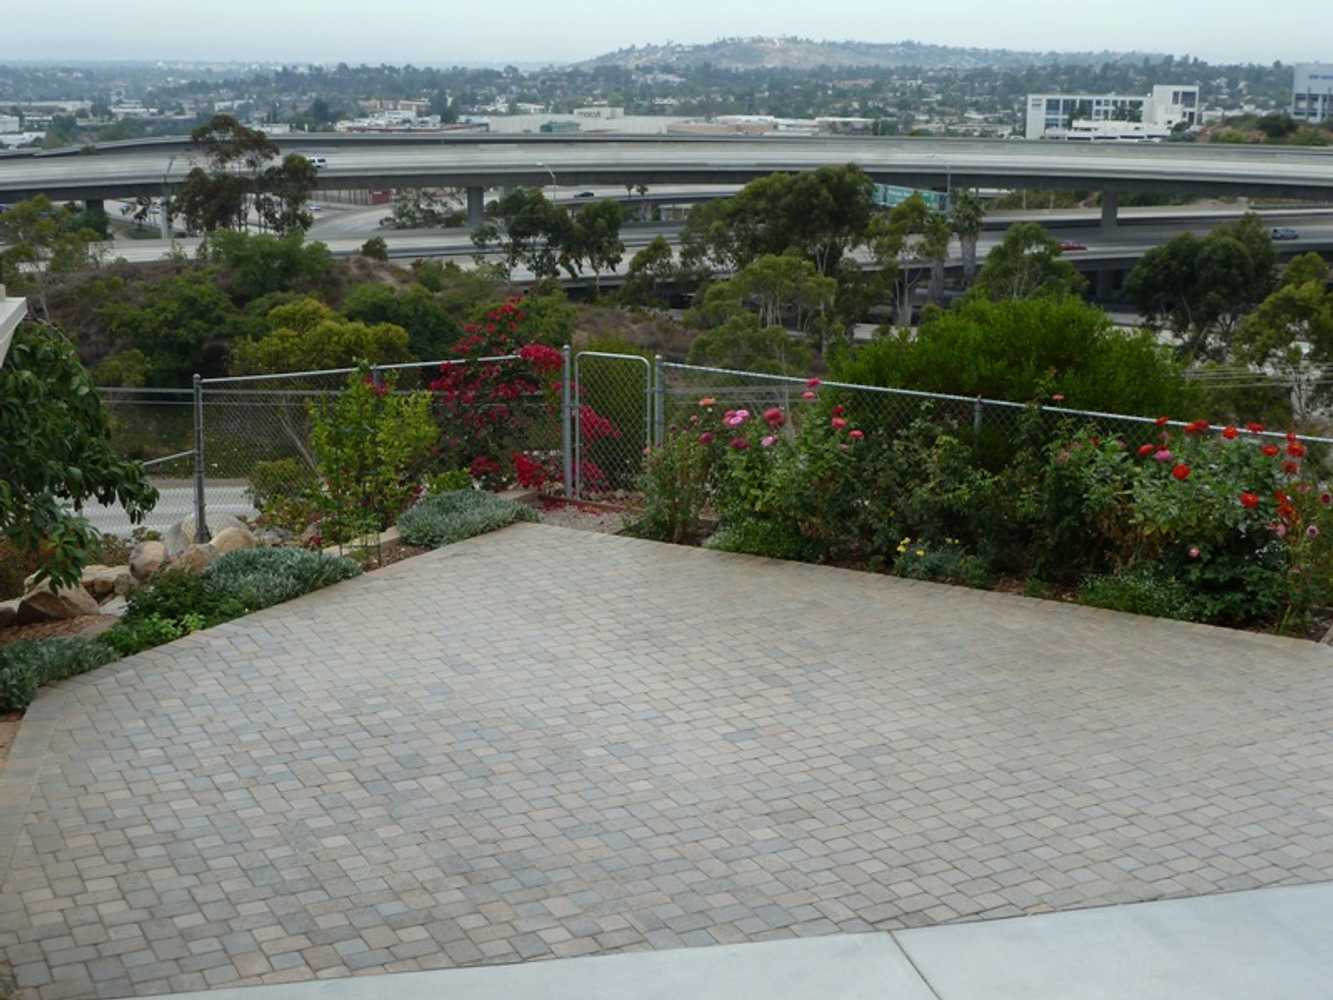 Paver Brick driveway in San Diego County